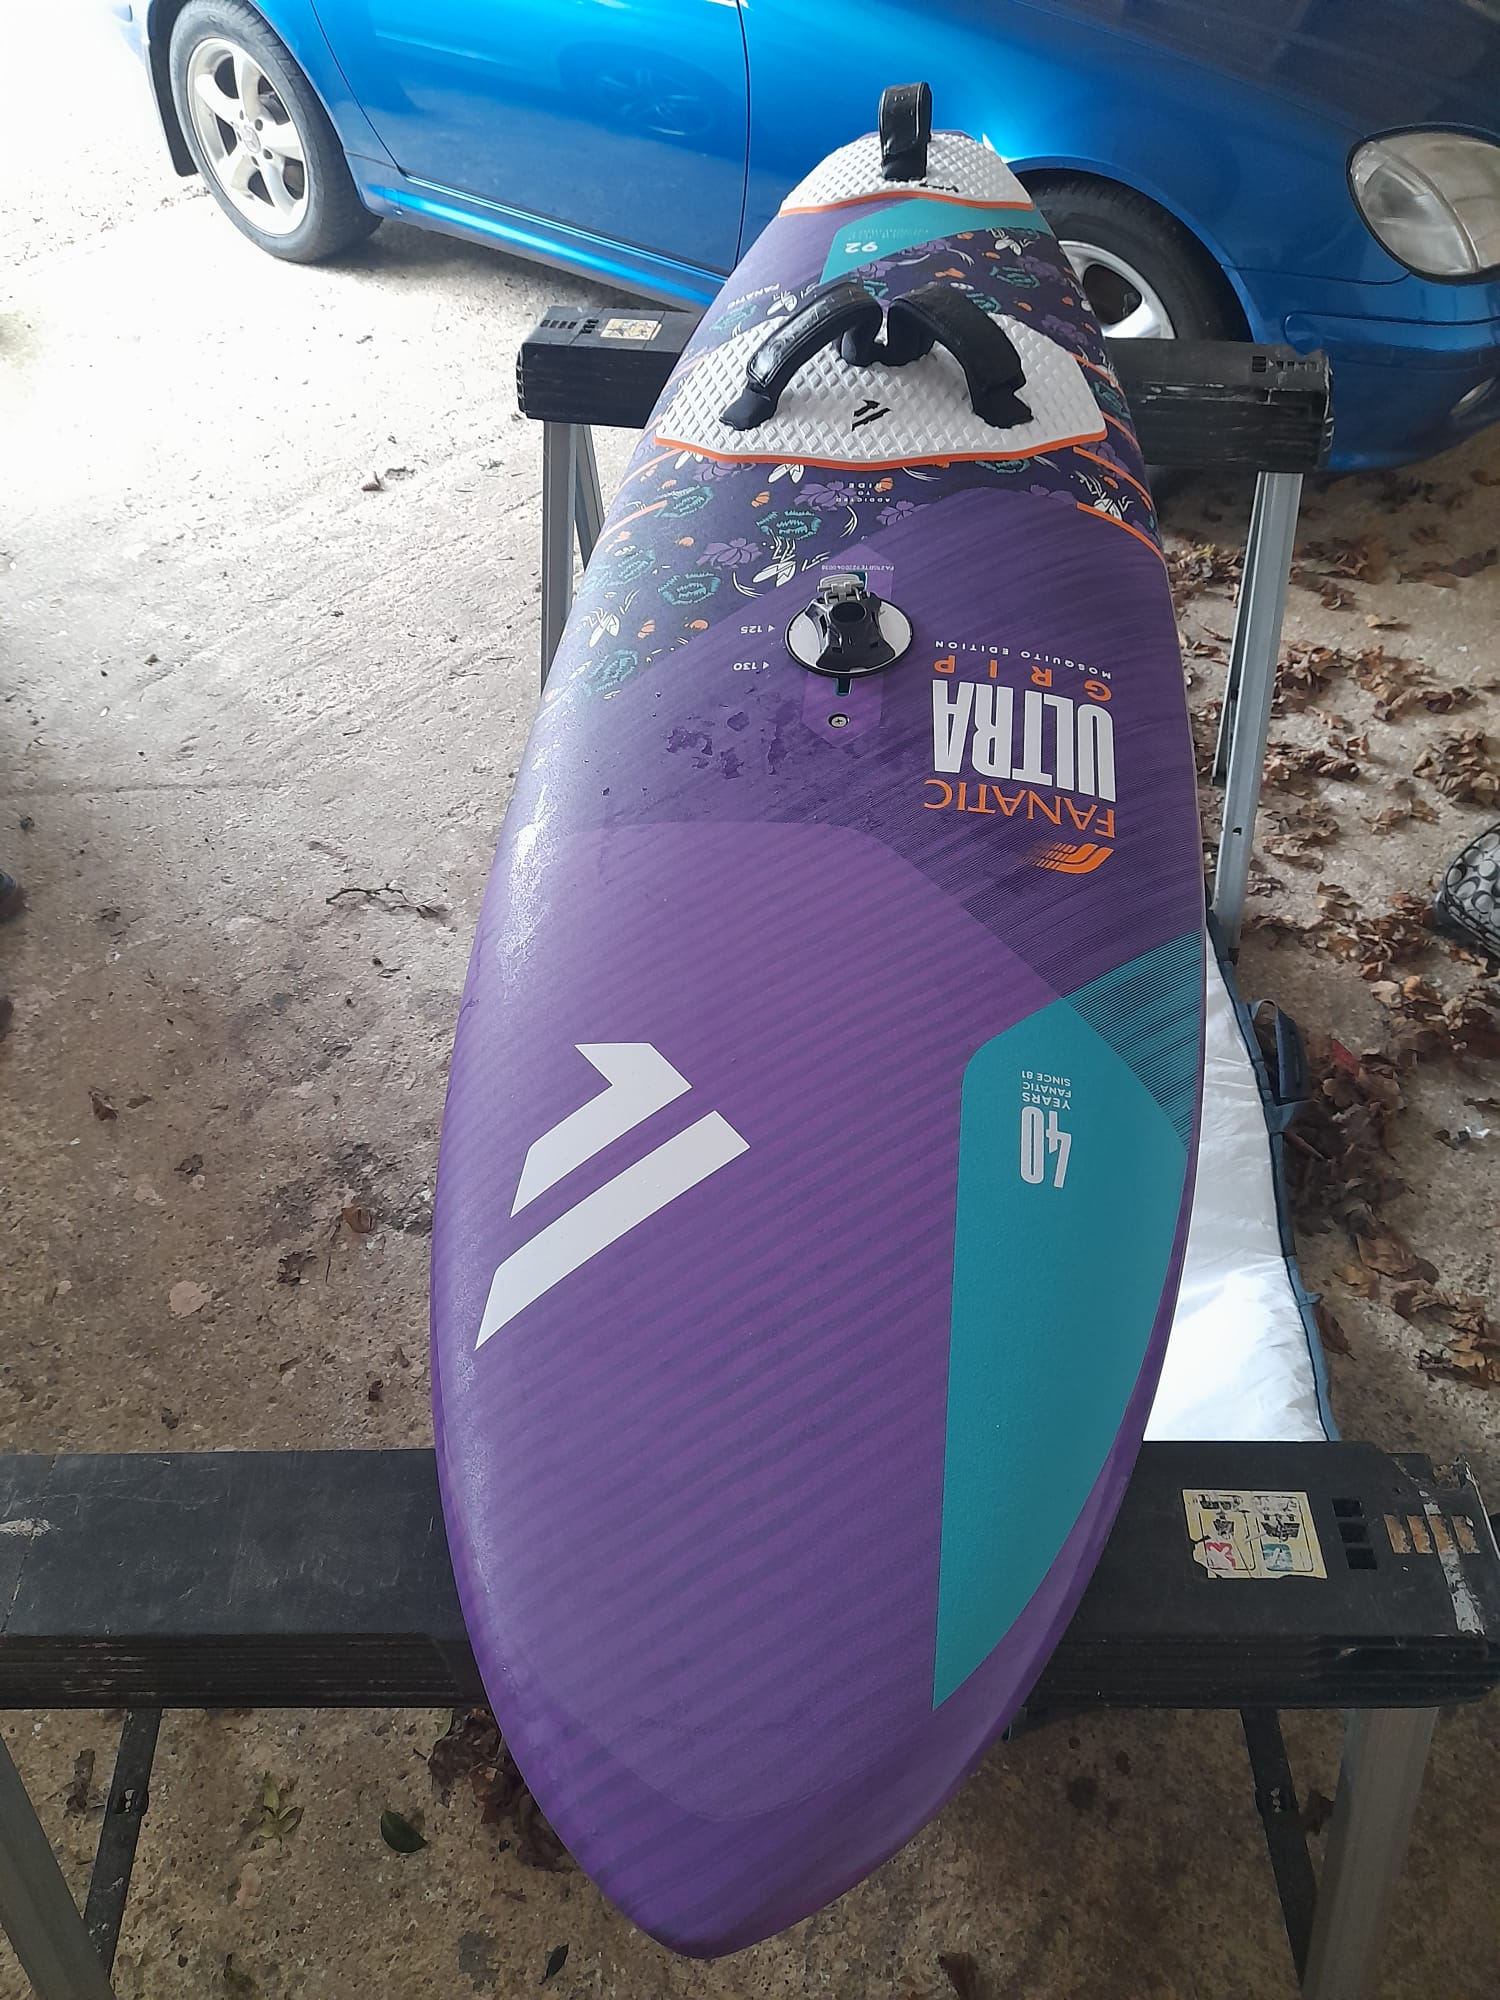 Used Fanatic Grip Ultra mosquito edition 92l - Worthing Watersports - Windsurfing Boards - Fanatic Windsurfing